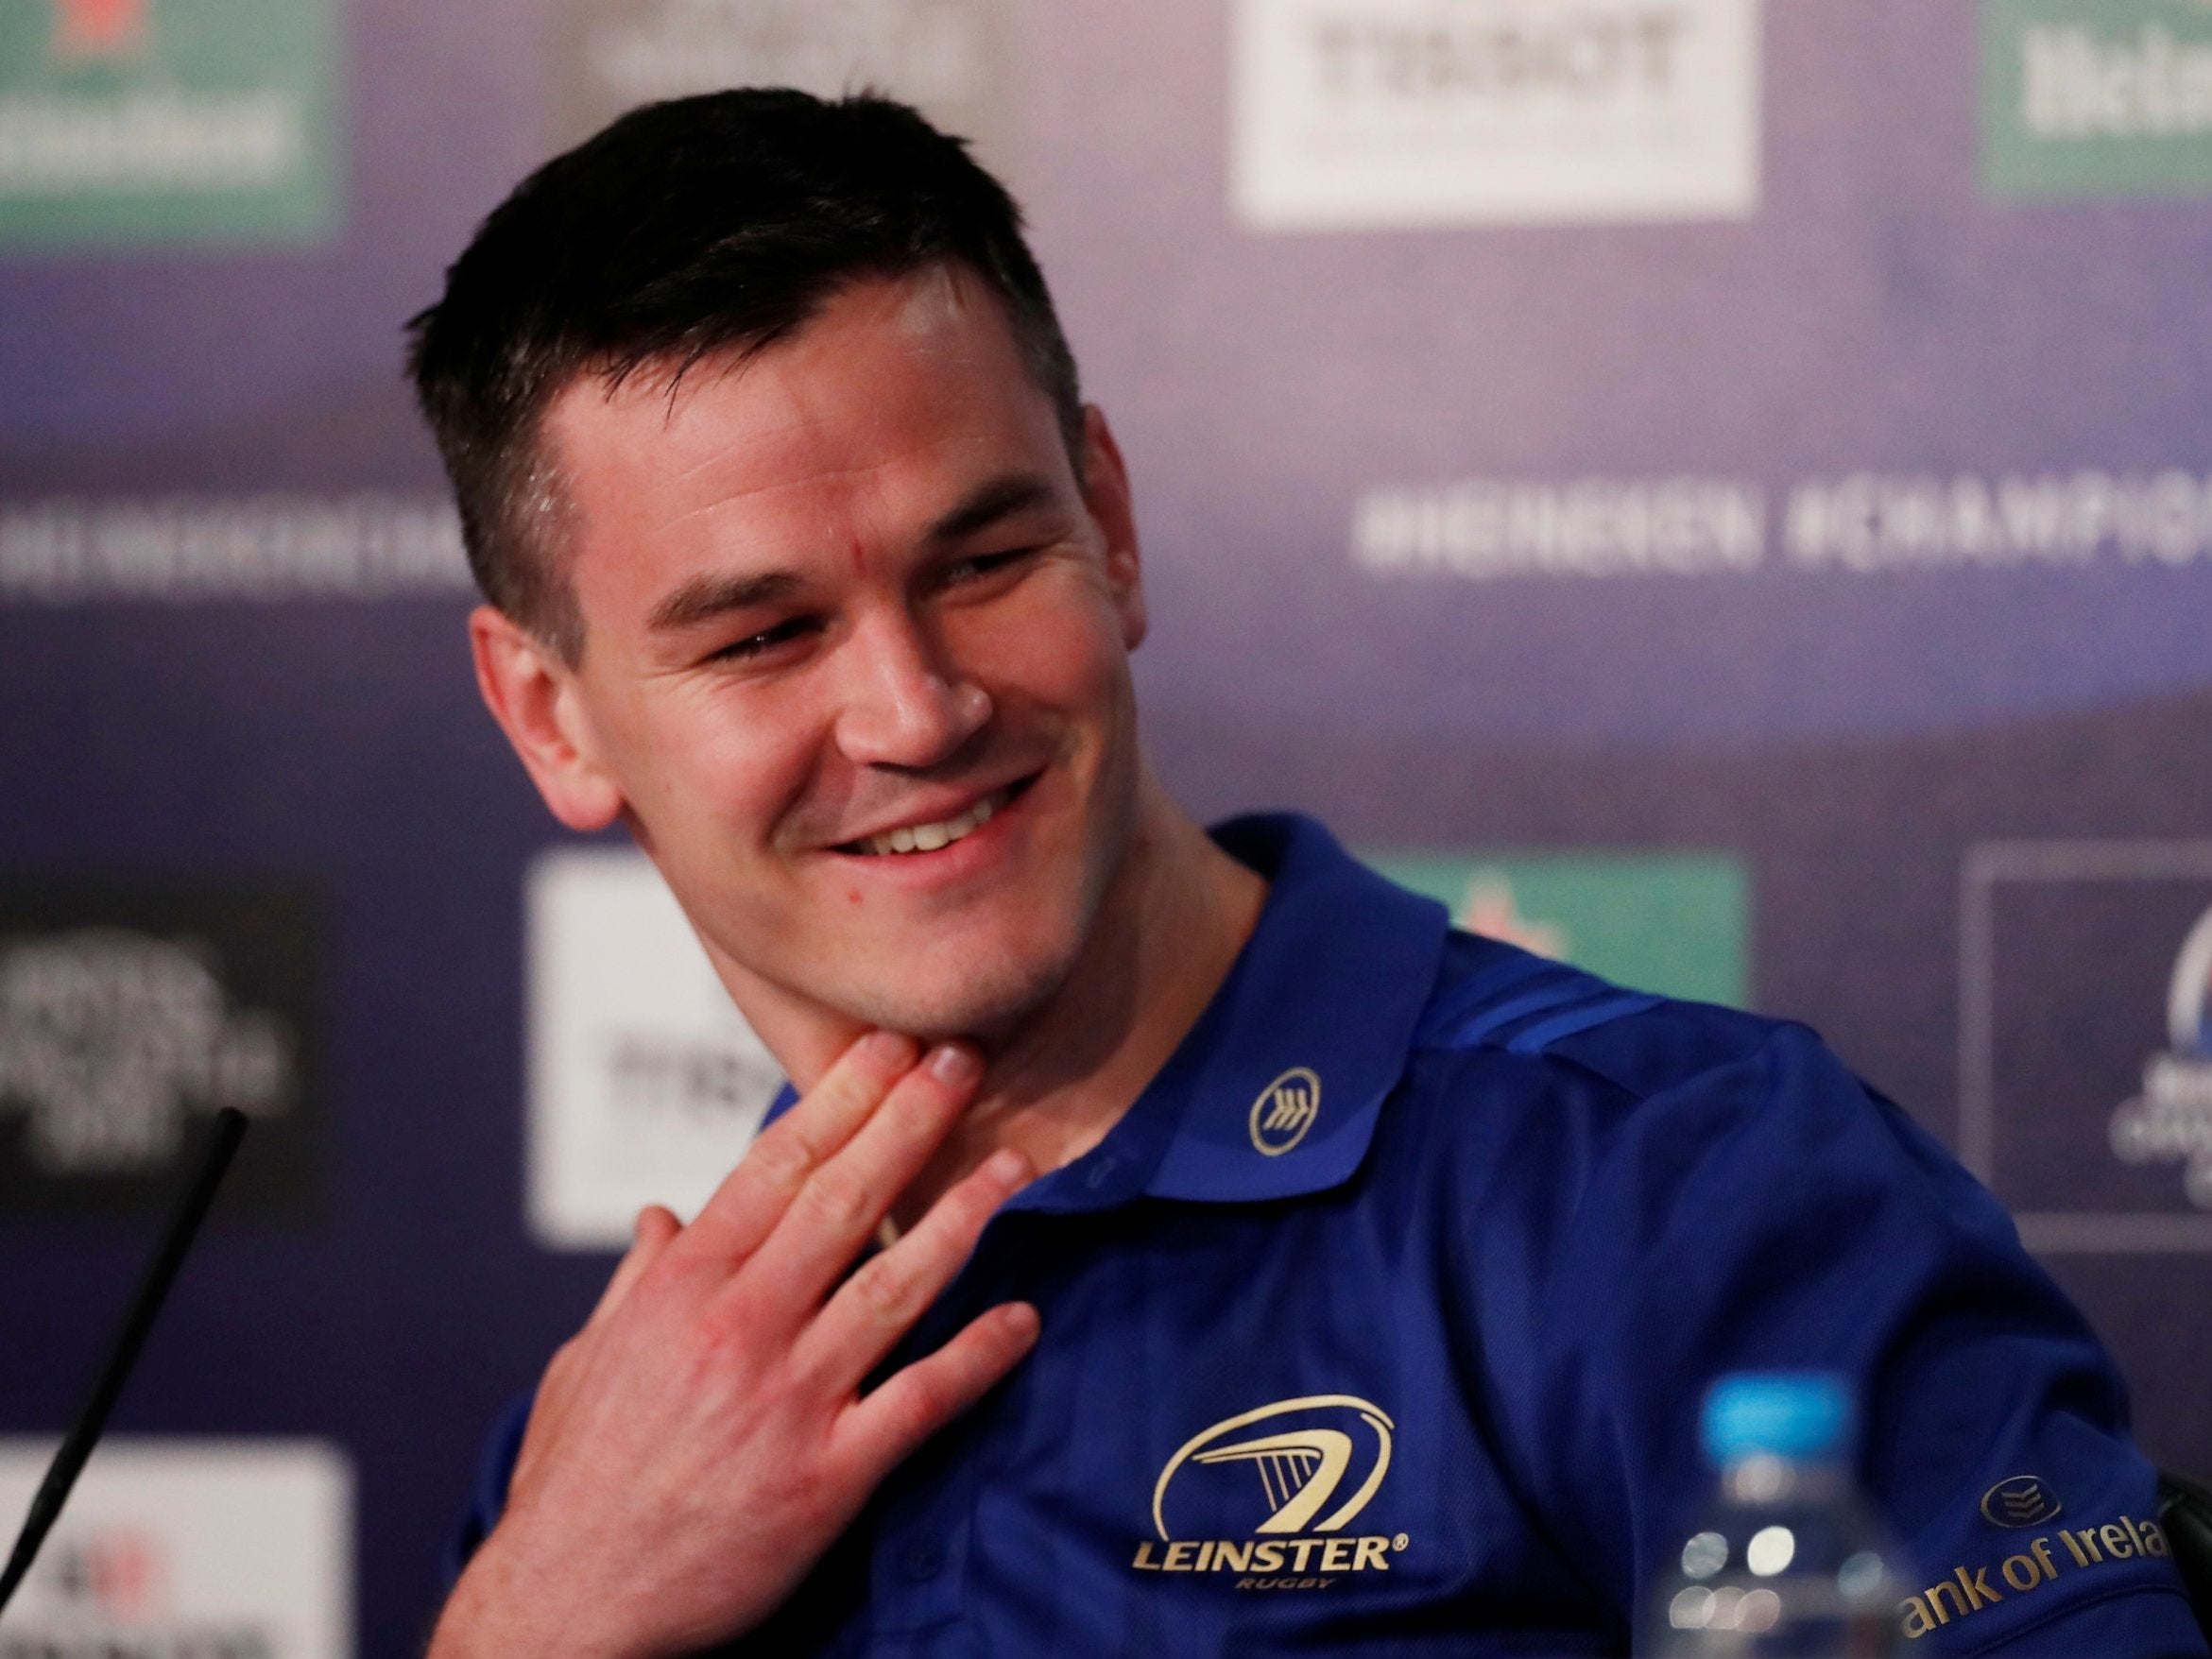 Johnny Sexton will lead Leinster in their Champions Cup final against Saracens